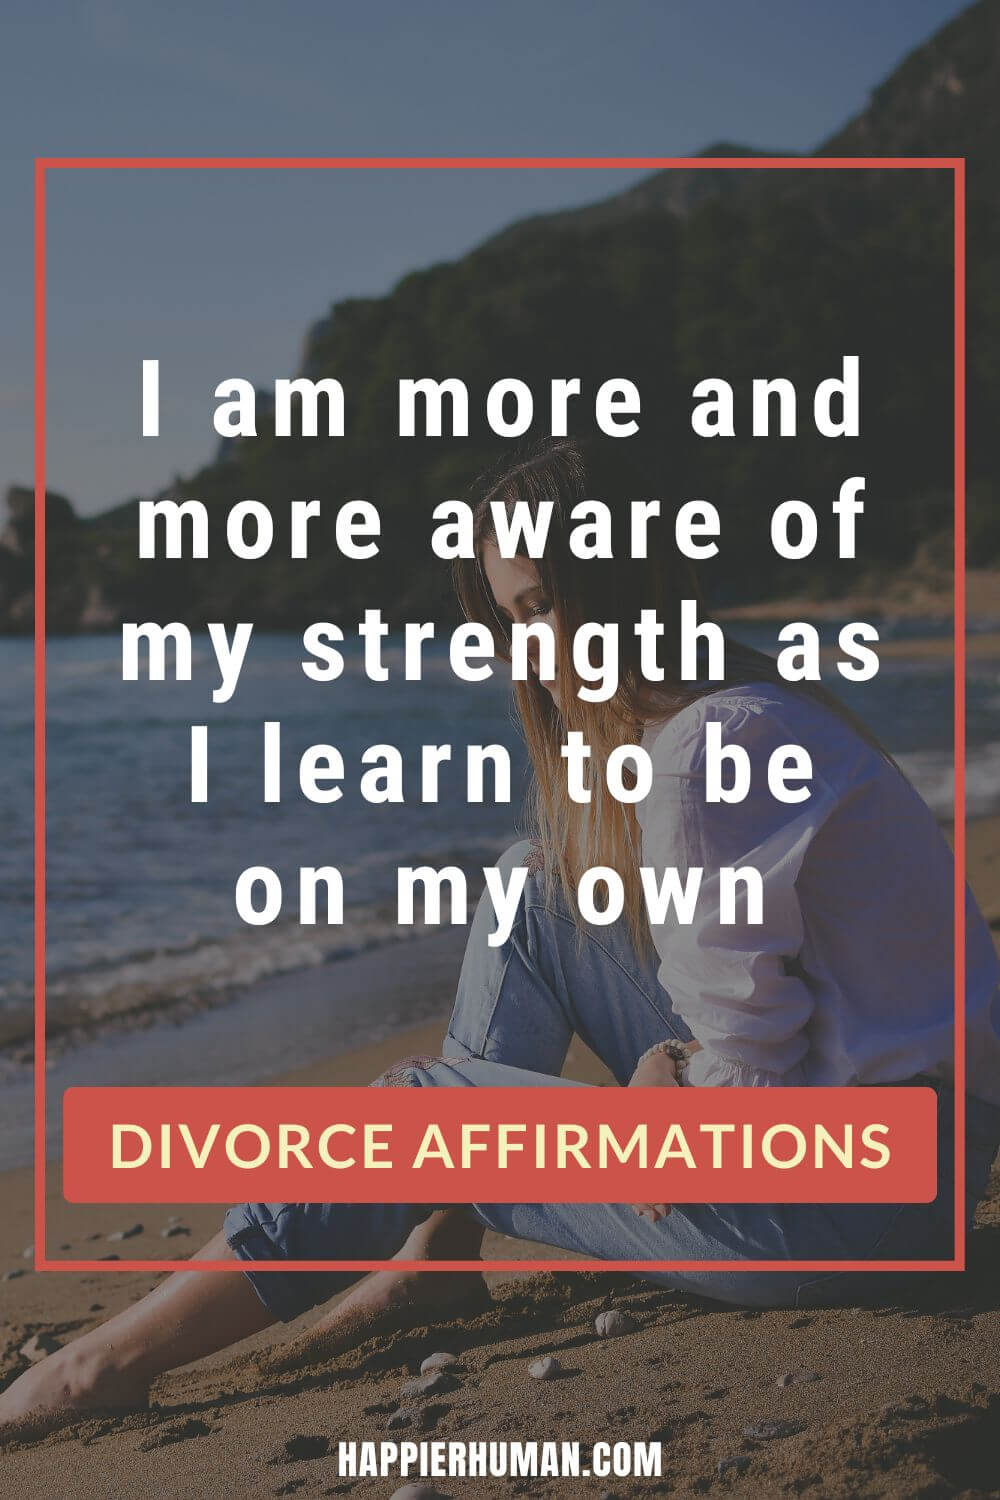 Affirmations for Divorce - I am more and more aware of my strength as I learn to be on my own | example of affidavit for divorce australia | can you manifest a divorce | positive affirmations for divorce